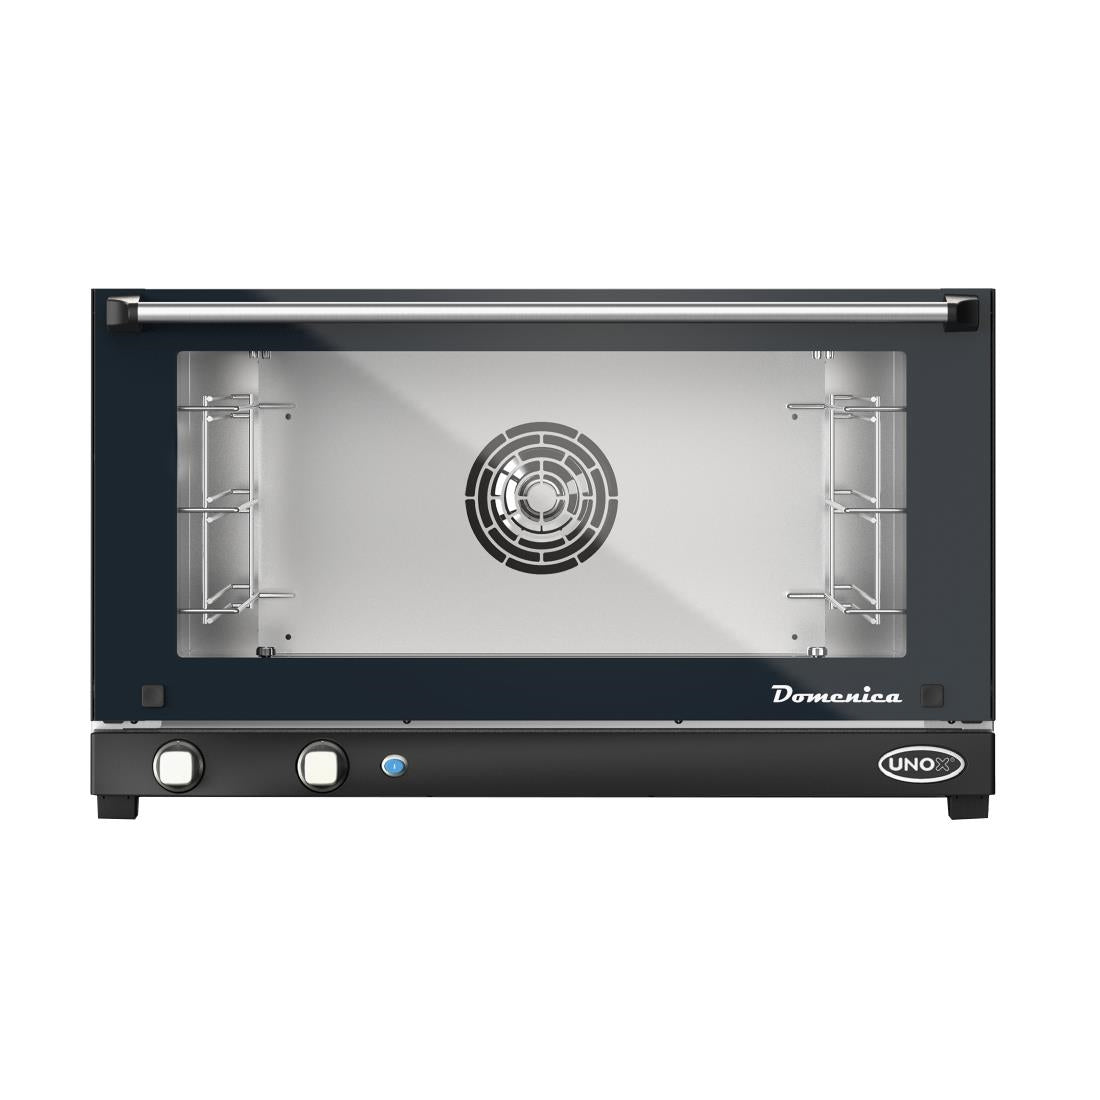 DT319 Unox LineMicro Domenica Manual Convection Oven XF033